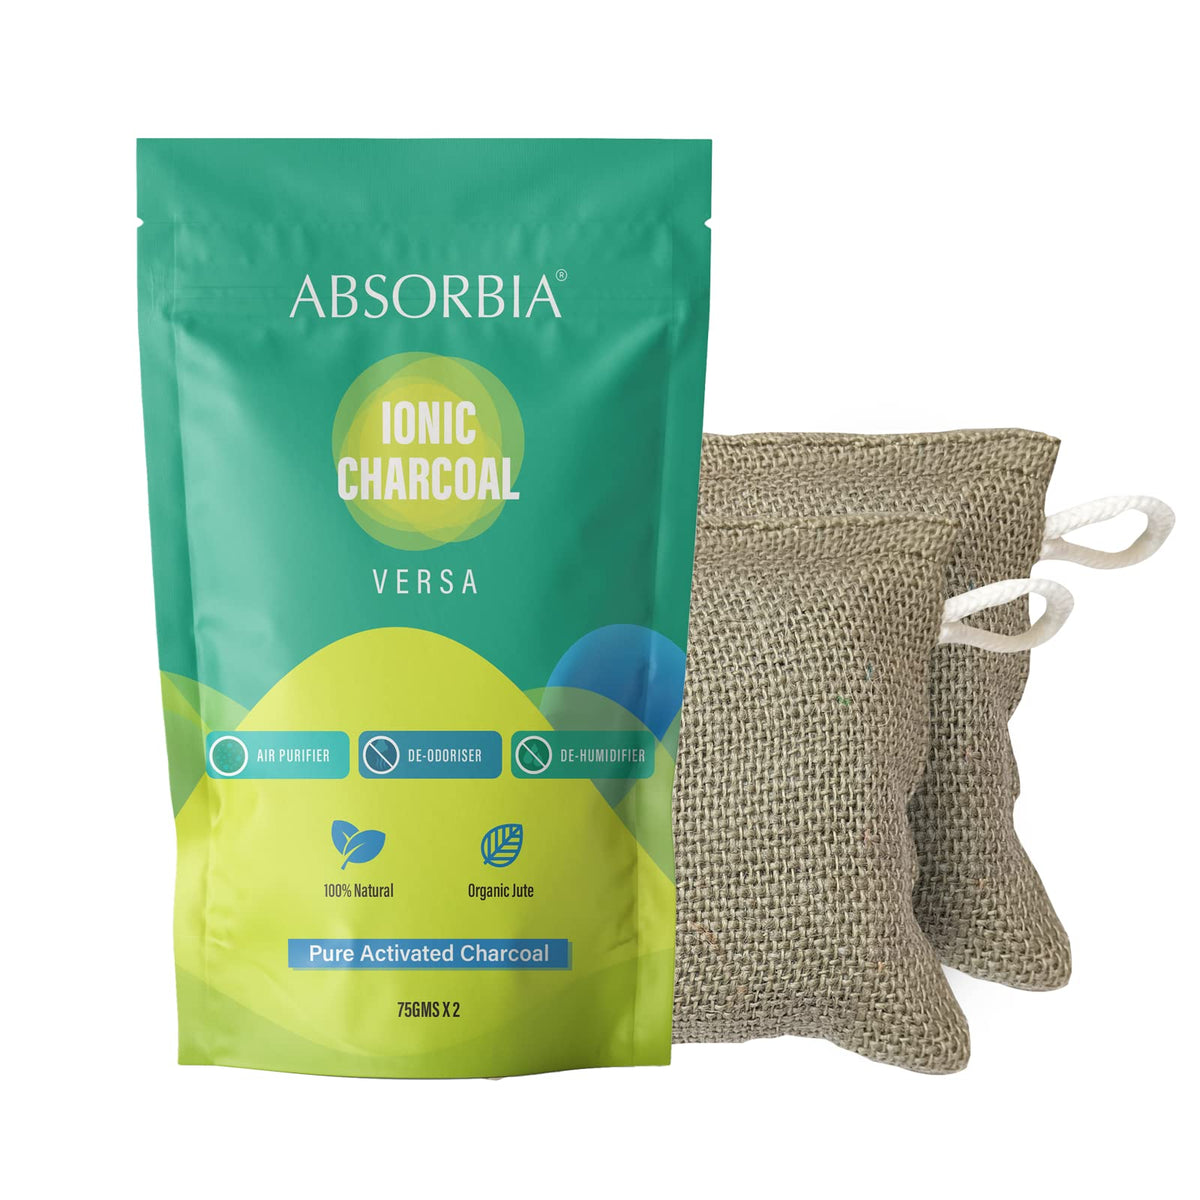 ABSORBIA IONIC VERSA Pure Activated Charcoal Air Purifier, made with Organic Jute Bag | Natural Deodorizer and Dehumidifier for Car Rooms Fridge Shoes etc | 75 Gms x 2 Bags